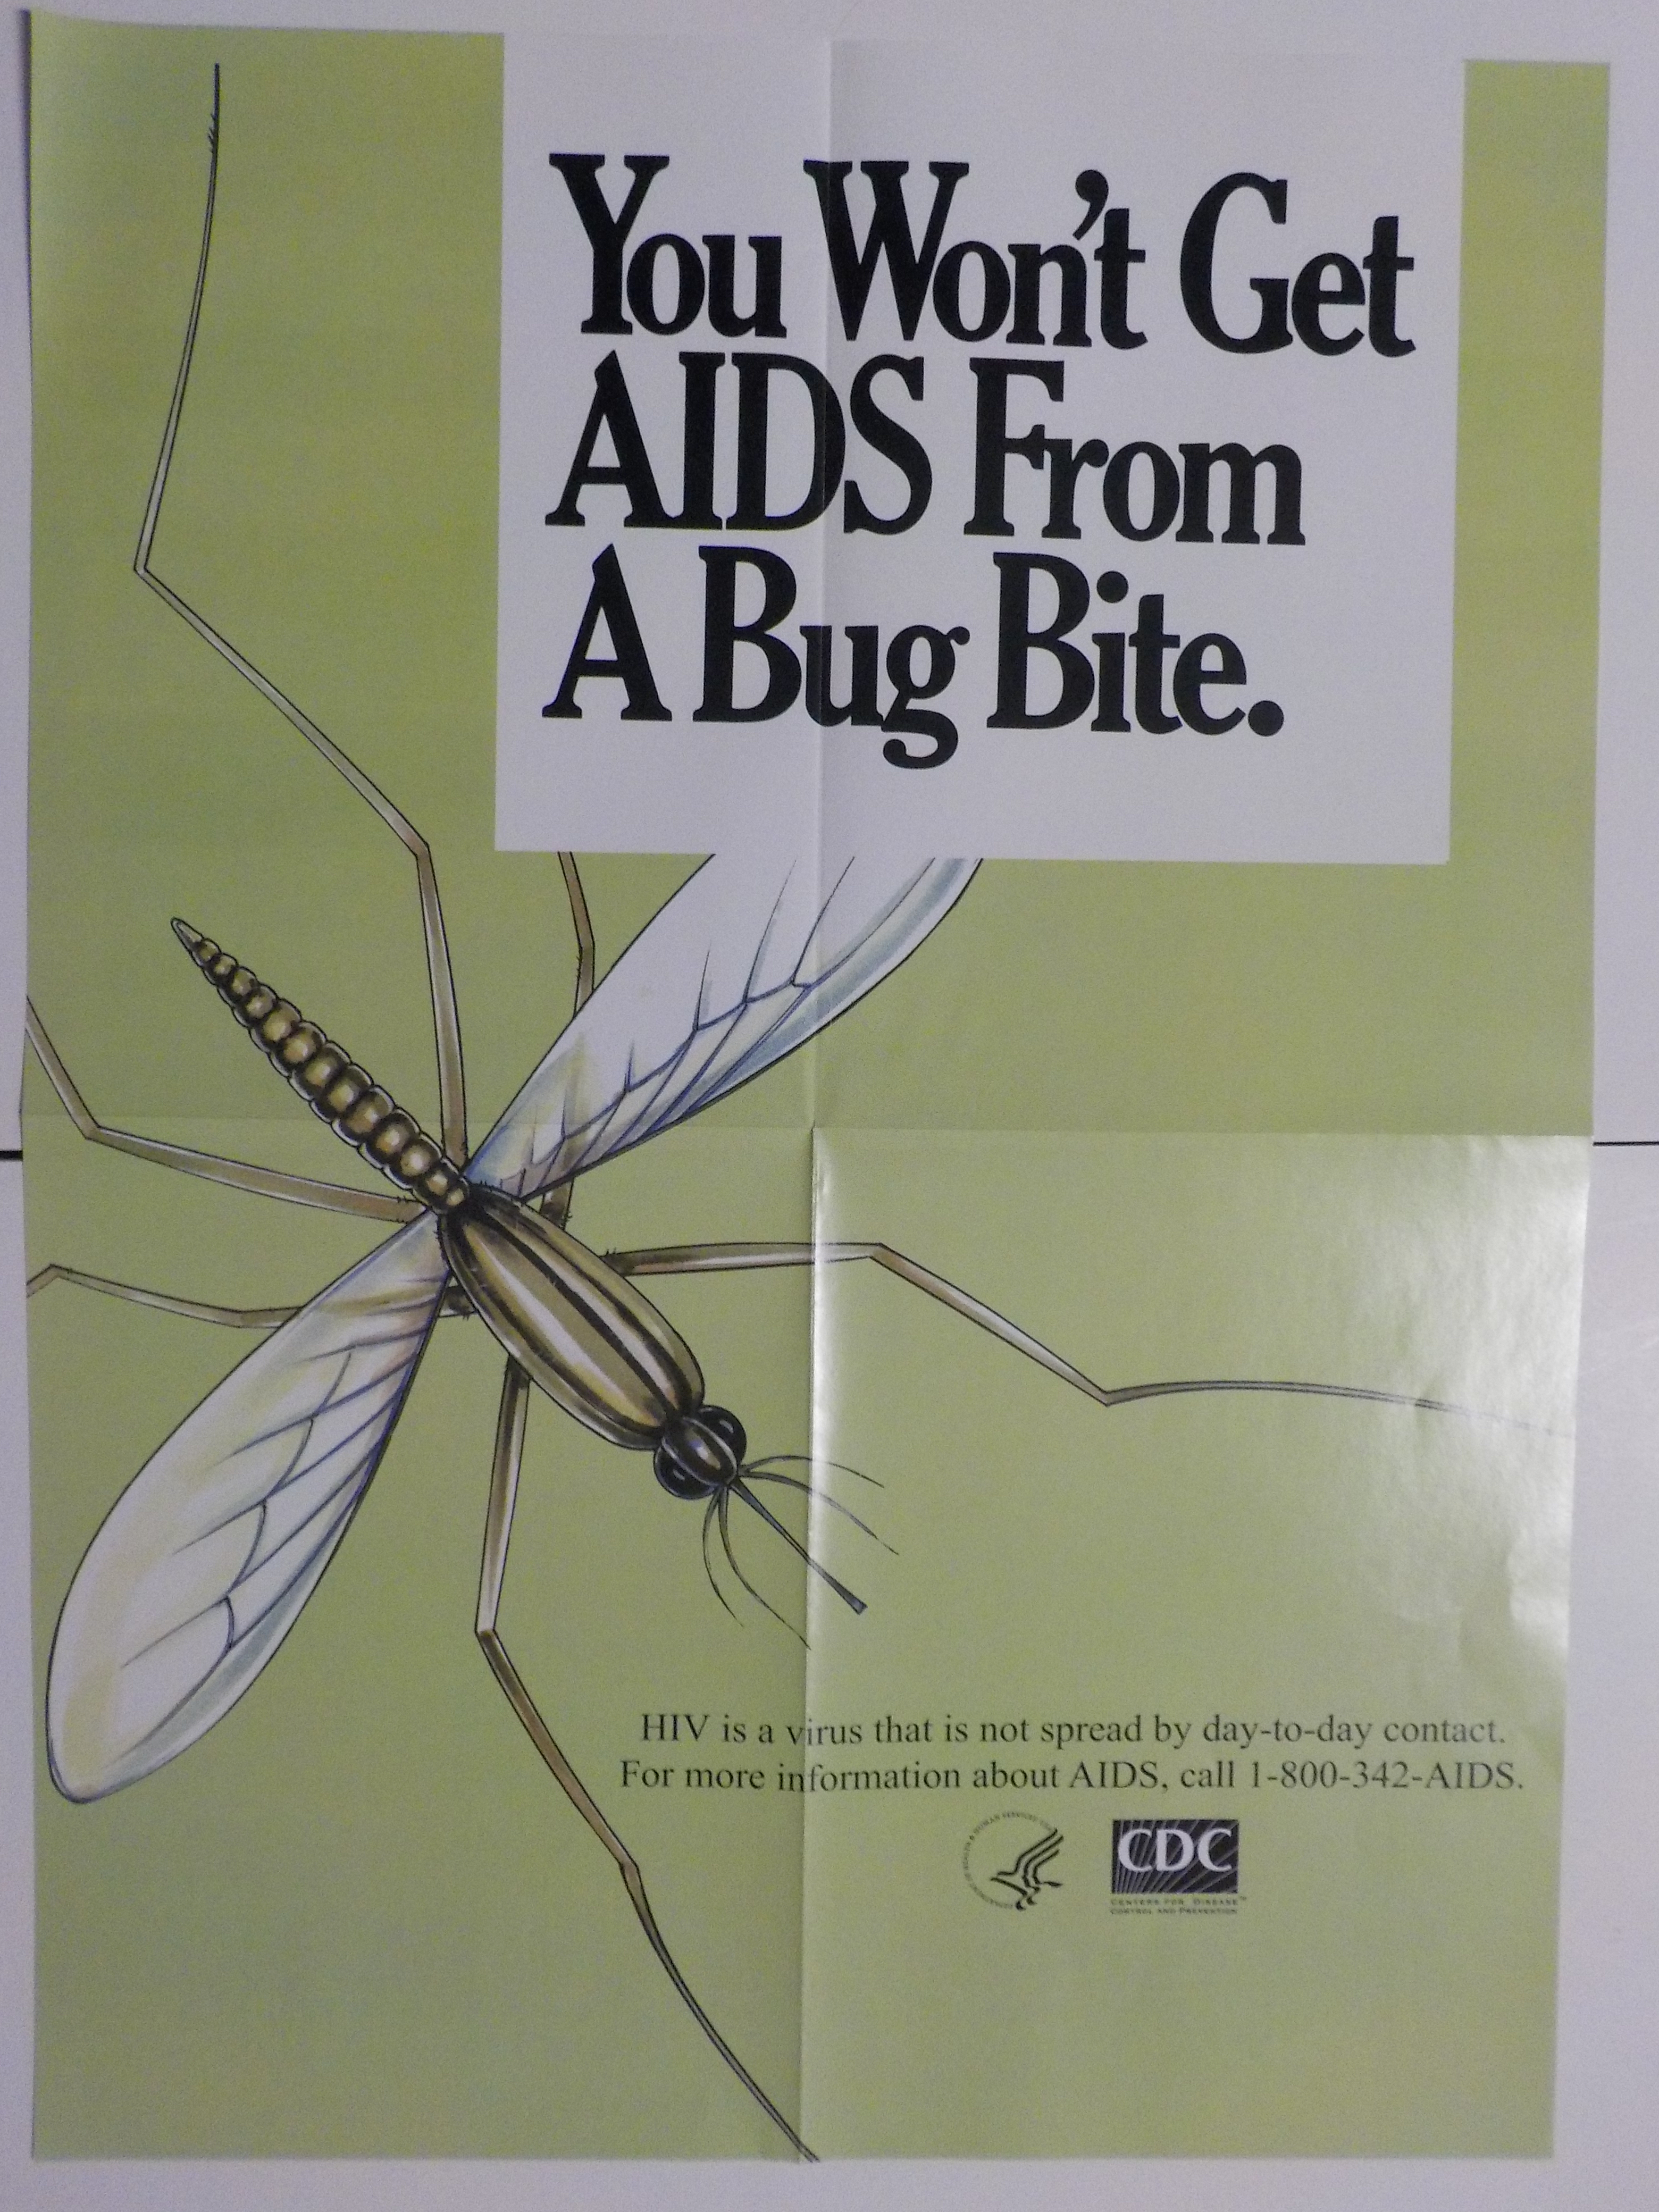 You won't to get AIDS from a bug bite